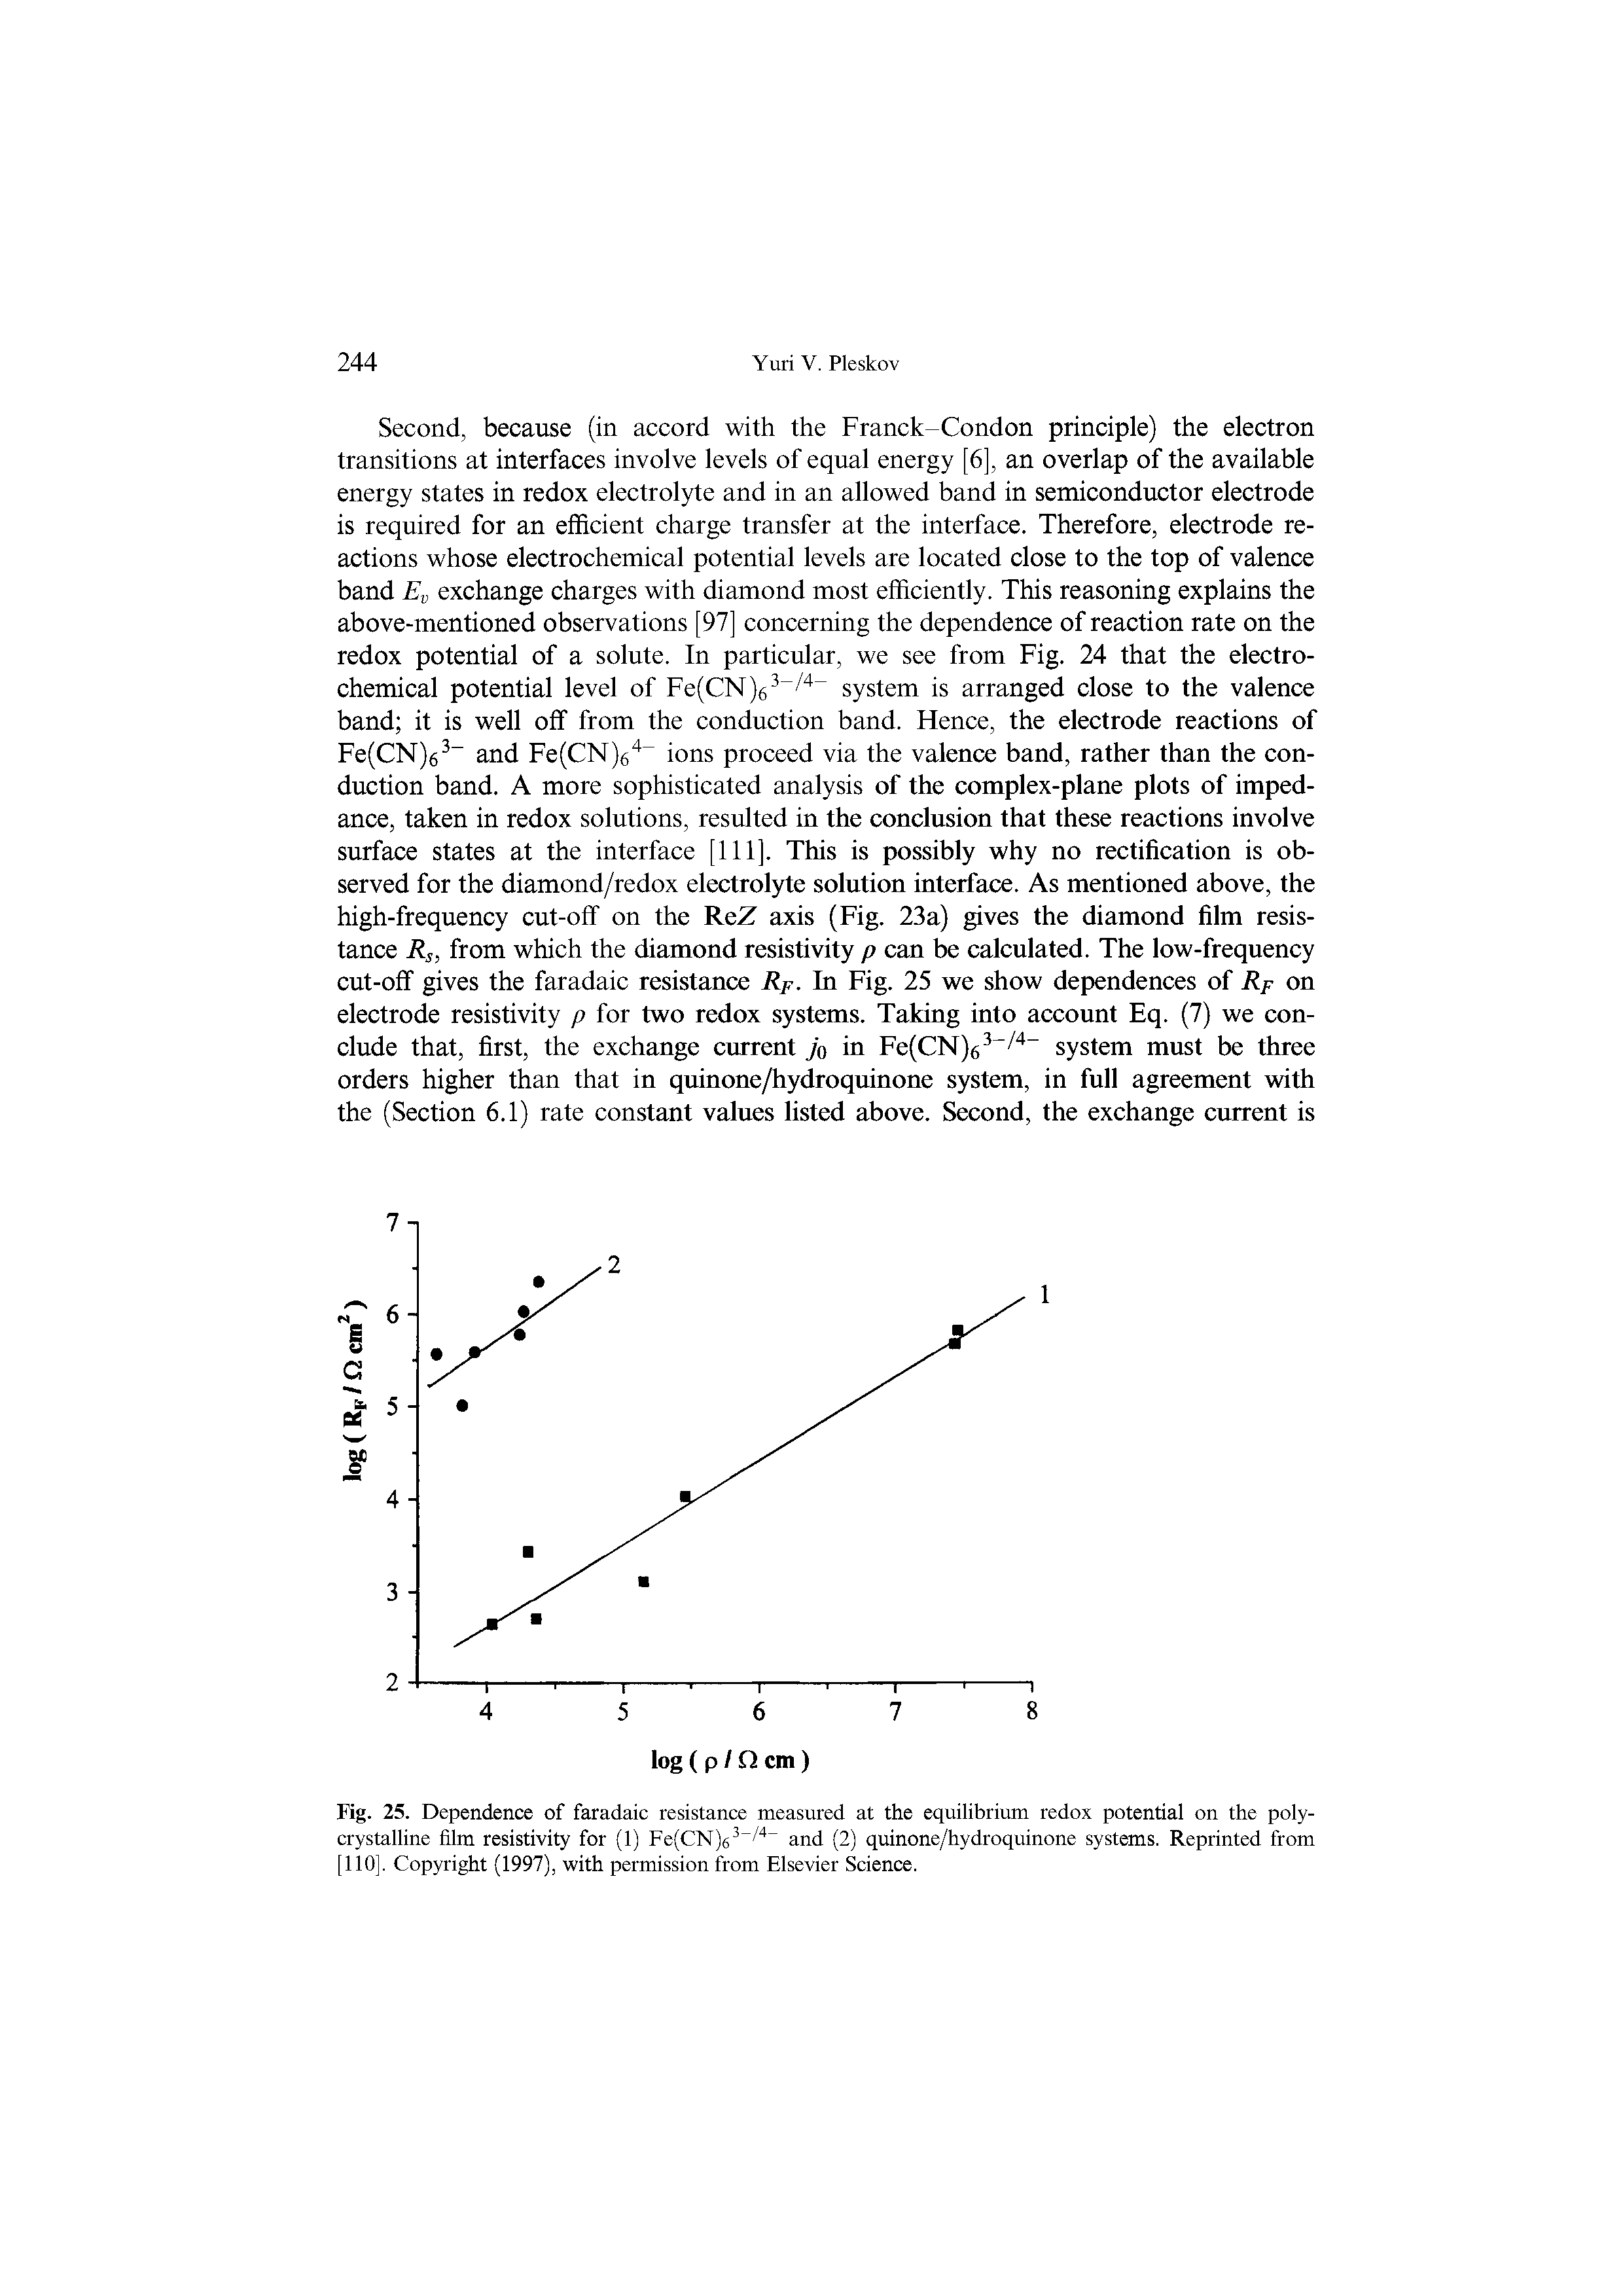 Fig. 25. Dependence of faradaic resistance measured at the equilibrium redox potential on the polycrystalline film resistivity for (1) Fe(CN)63, 4 and (2) quinone/hydroquinone systems. Reprinted from [110], Copyright (1997), with permission from Elsevier Science.